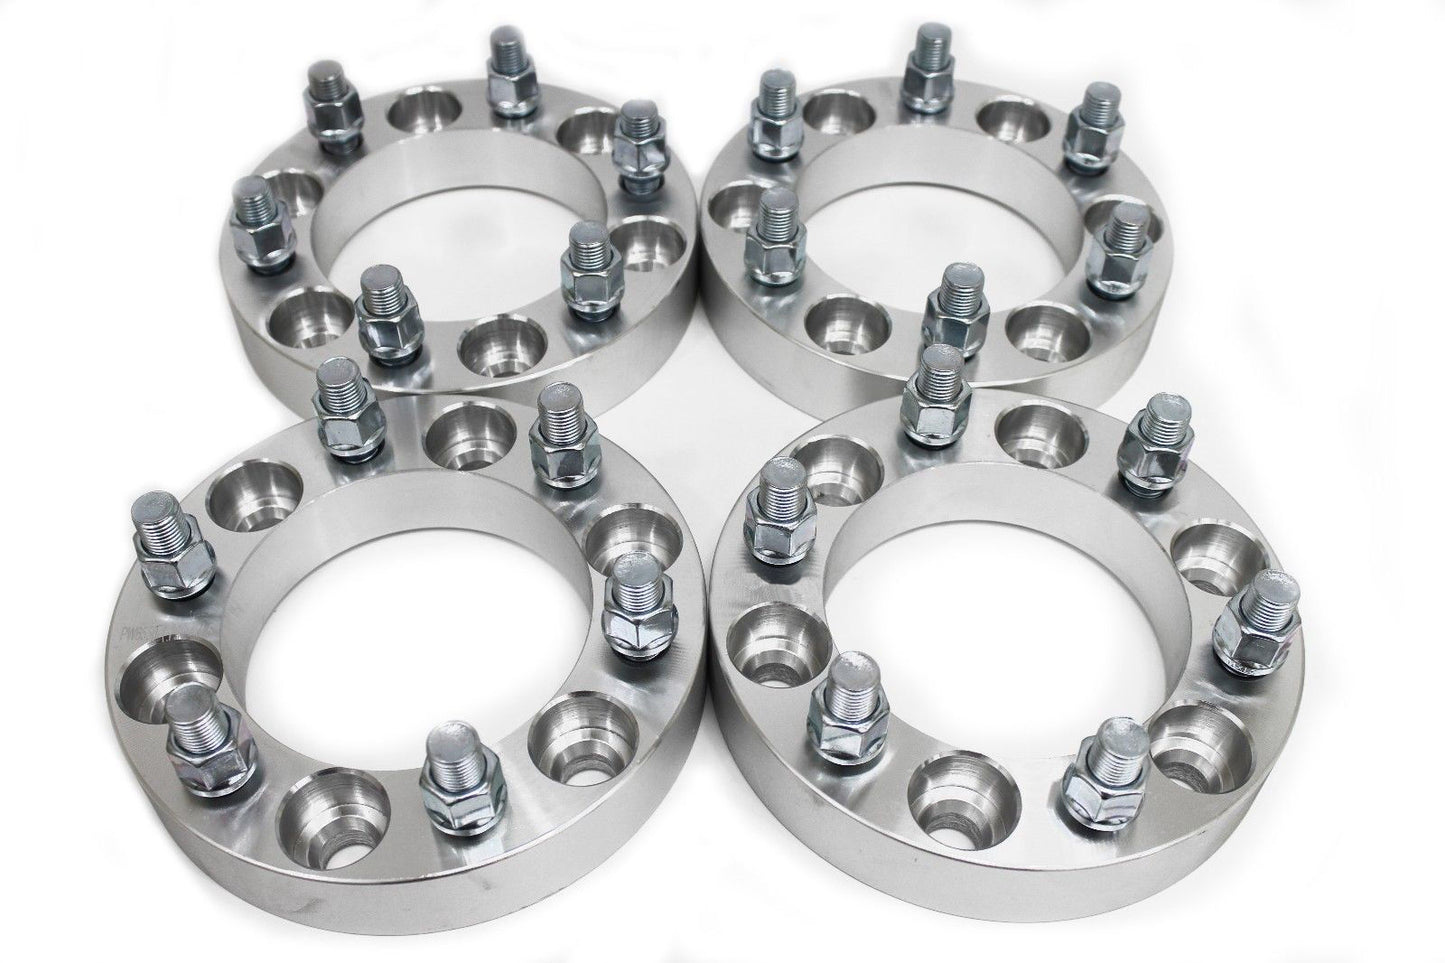 2 pairs 1.5" Wheel Spacers 6x5.5 To 6x5.5 (6X139.7) 108MM CB 14X1.5 Studs